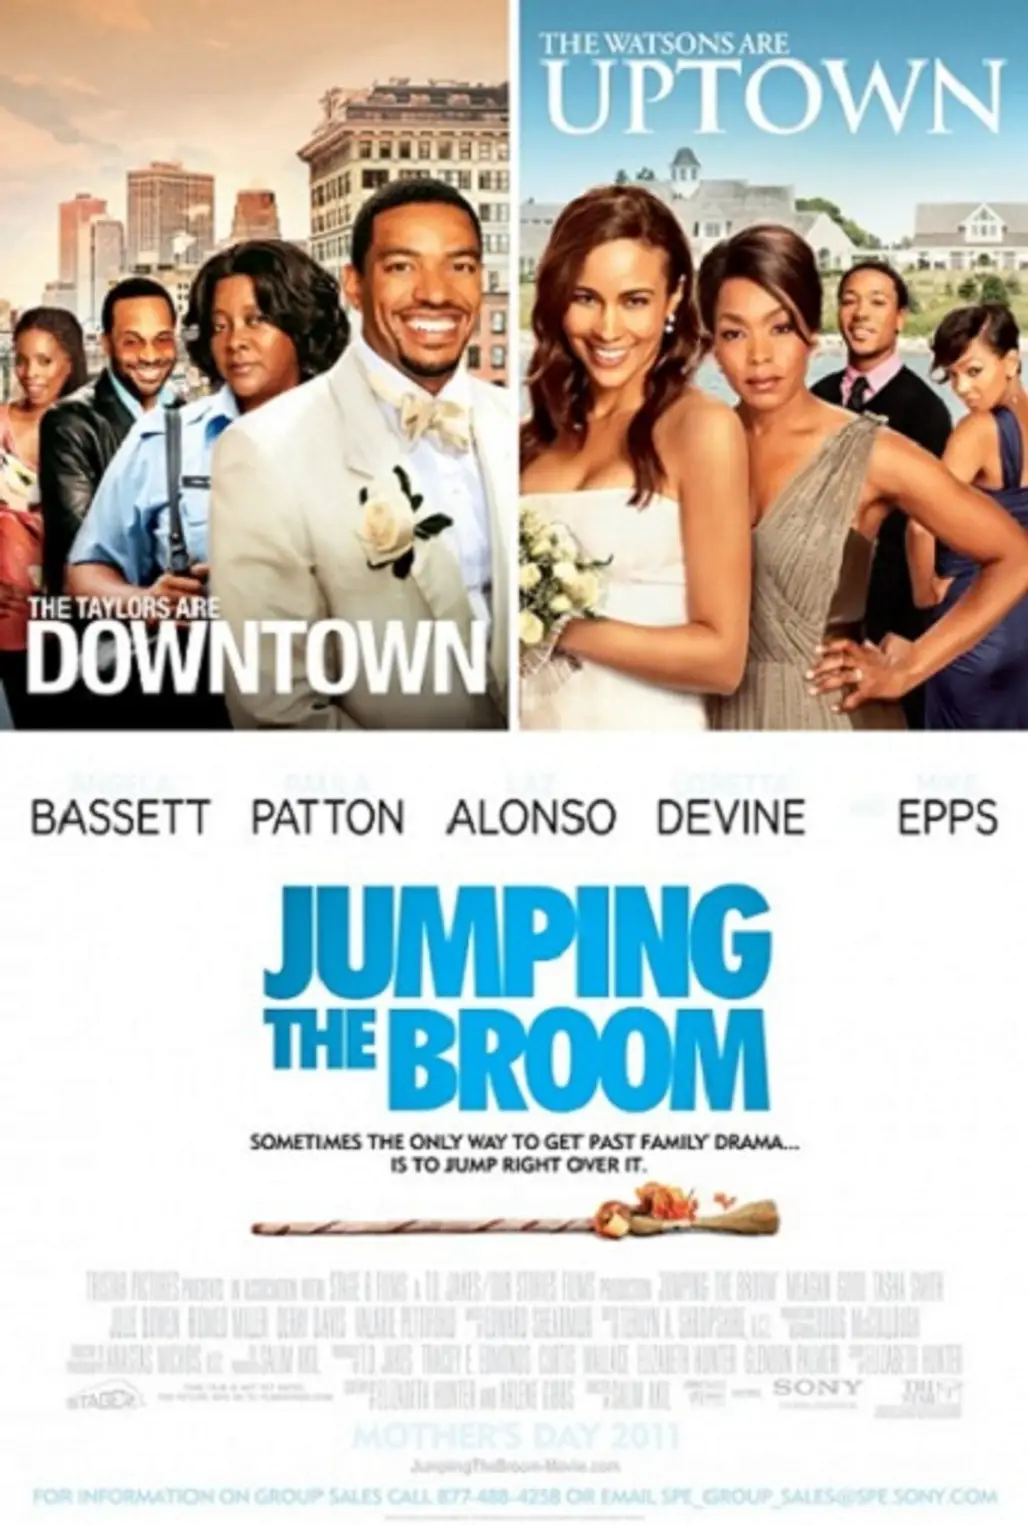 Jumping the Broom...